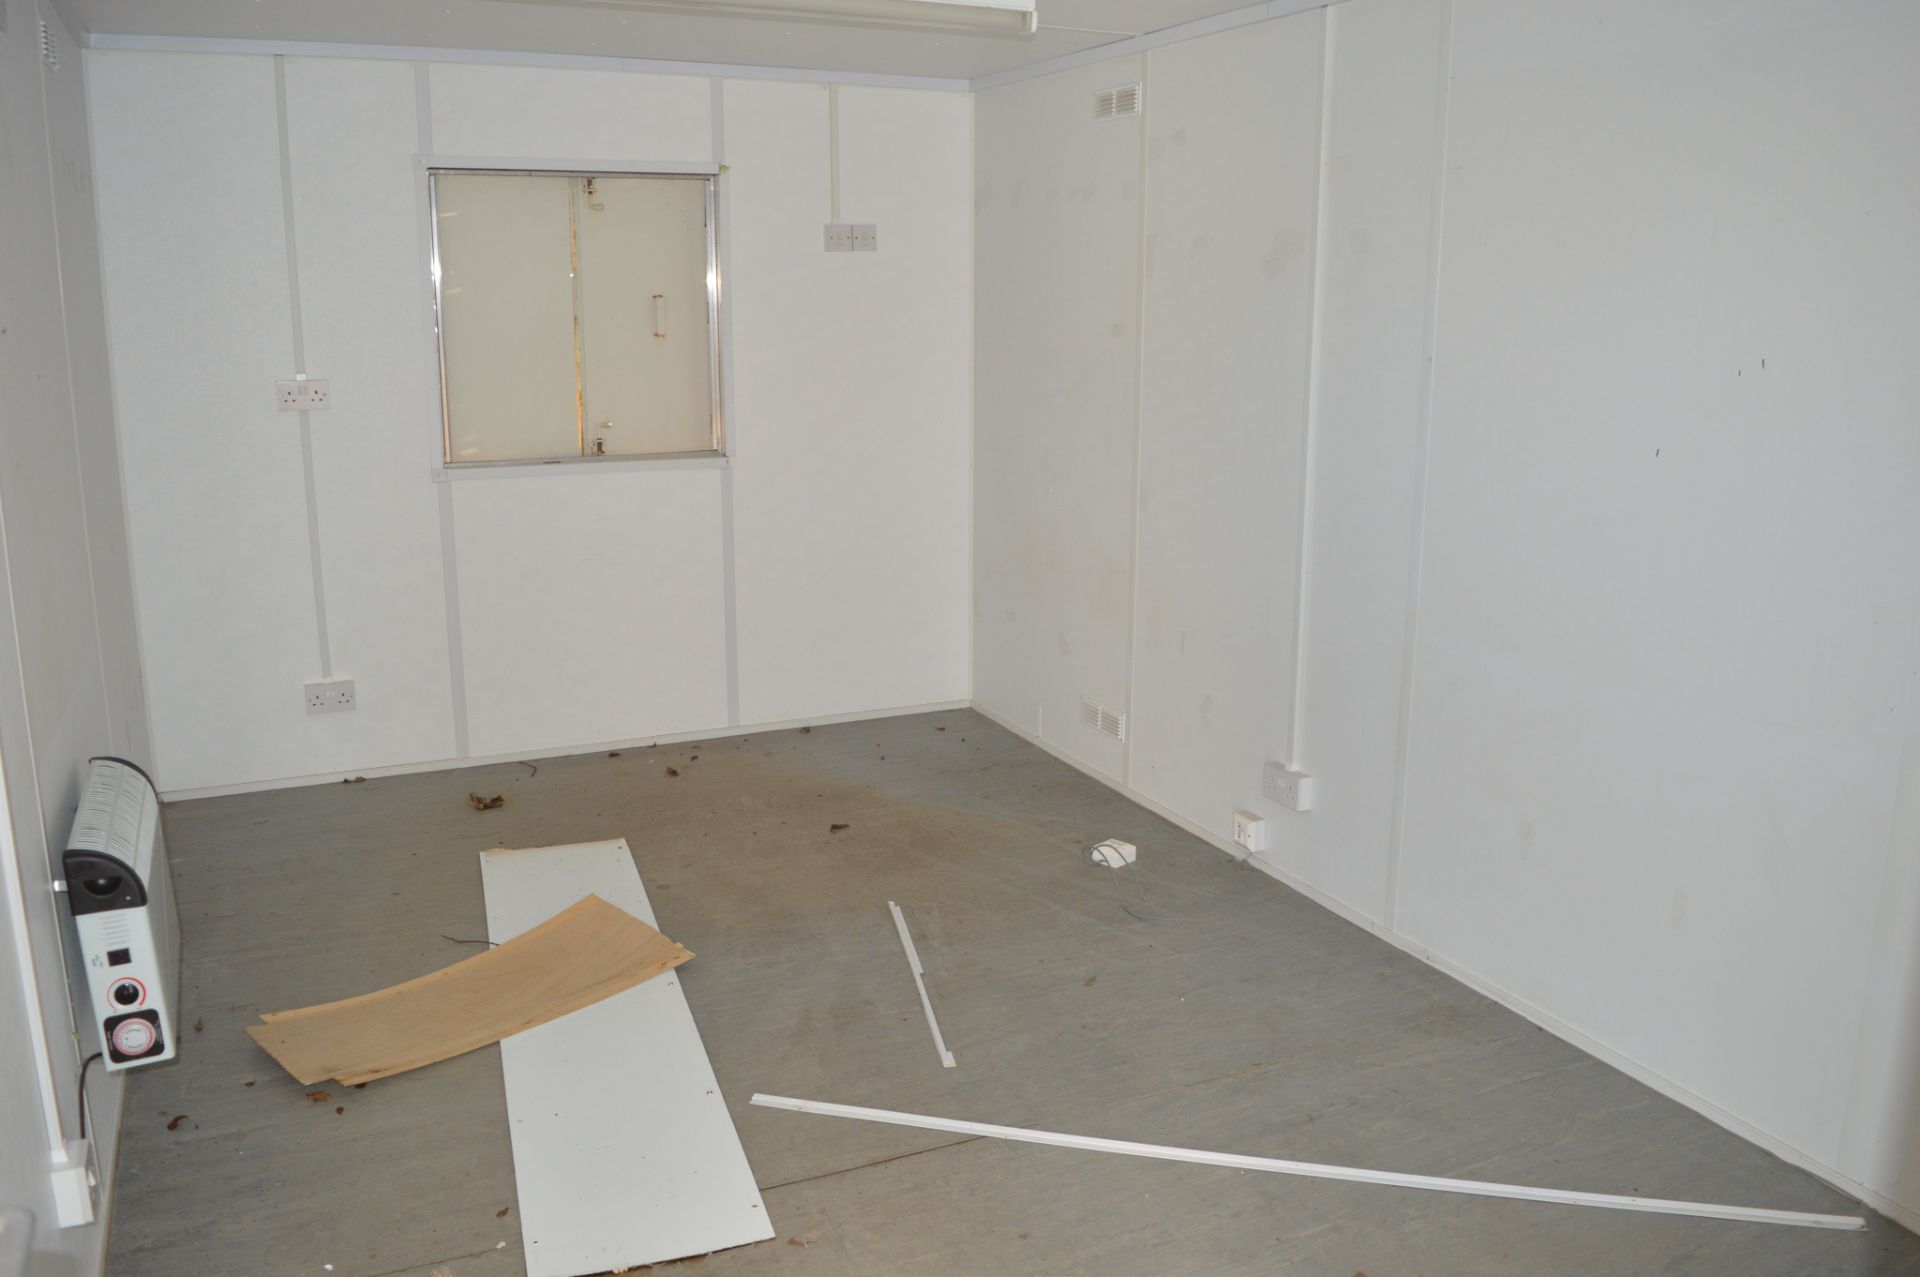 32 ft x 10 ft steel anti-vandal jack leg site office unit comprising of 2 offices BBA1379 - Image 7 of 9